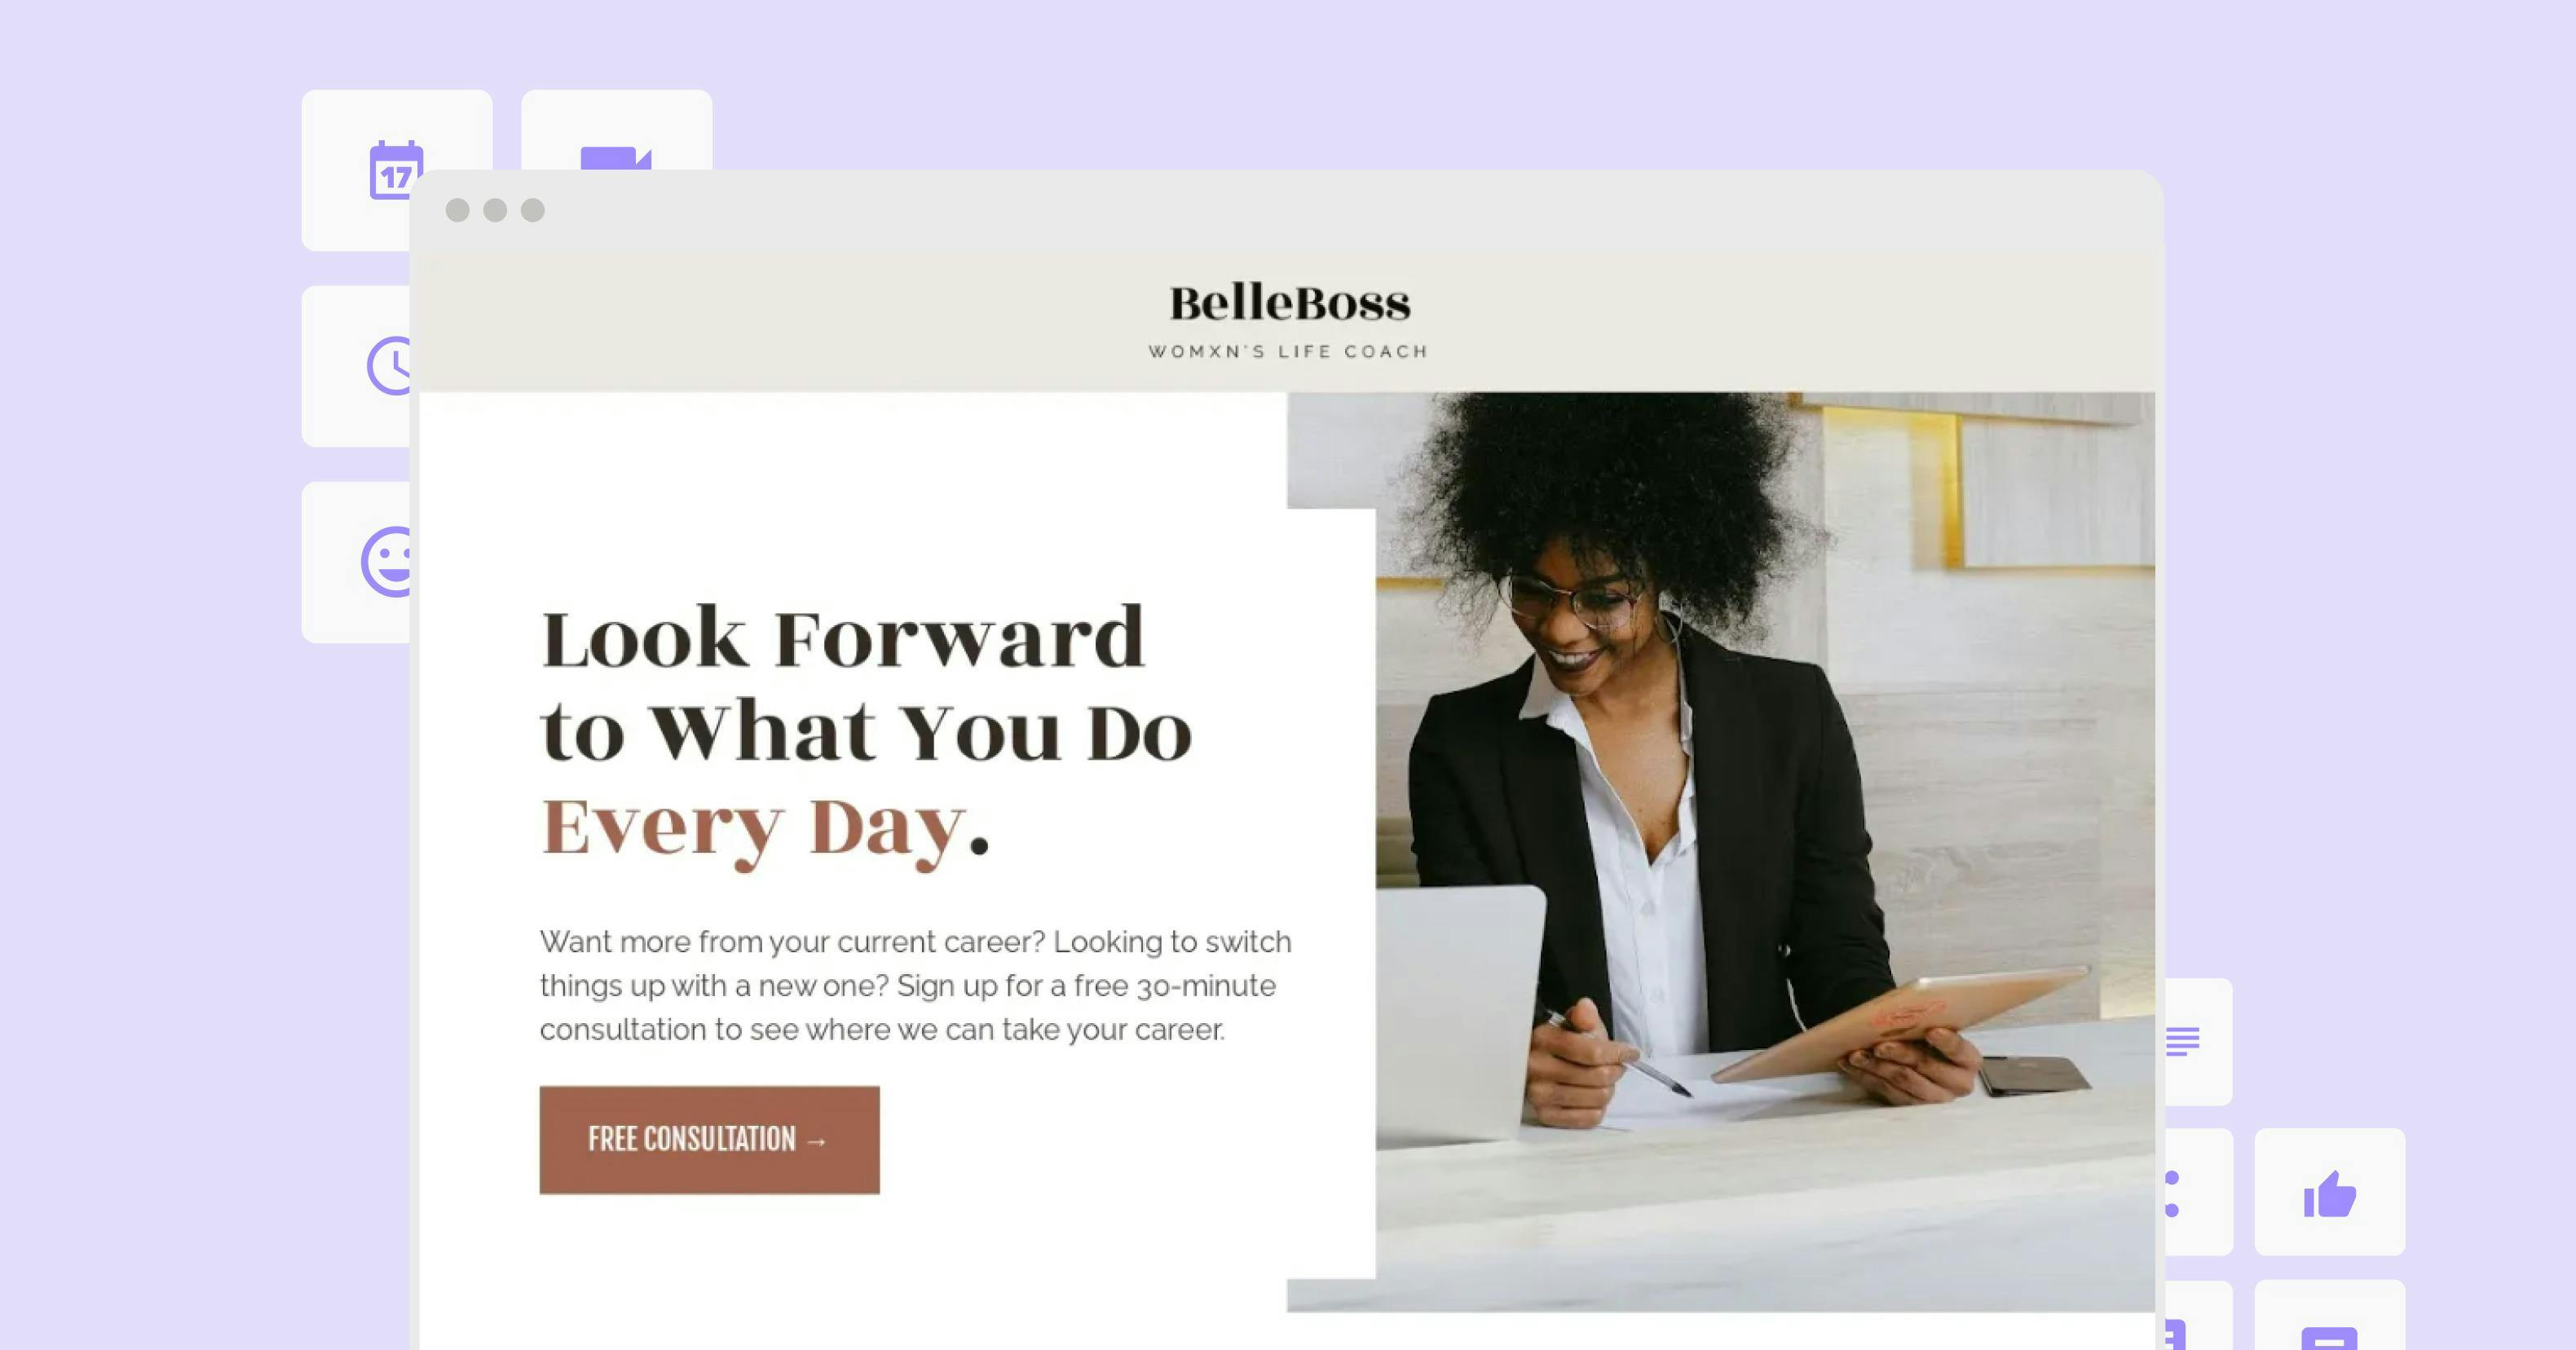 An example of a light purple landing page featuring a woman engrossed in her work, happily examining her laptop screen while holding a pen and iPad. This image illustrates which attributes describe a good landing page experience.